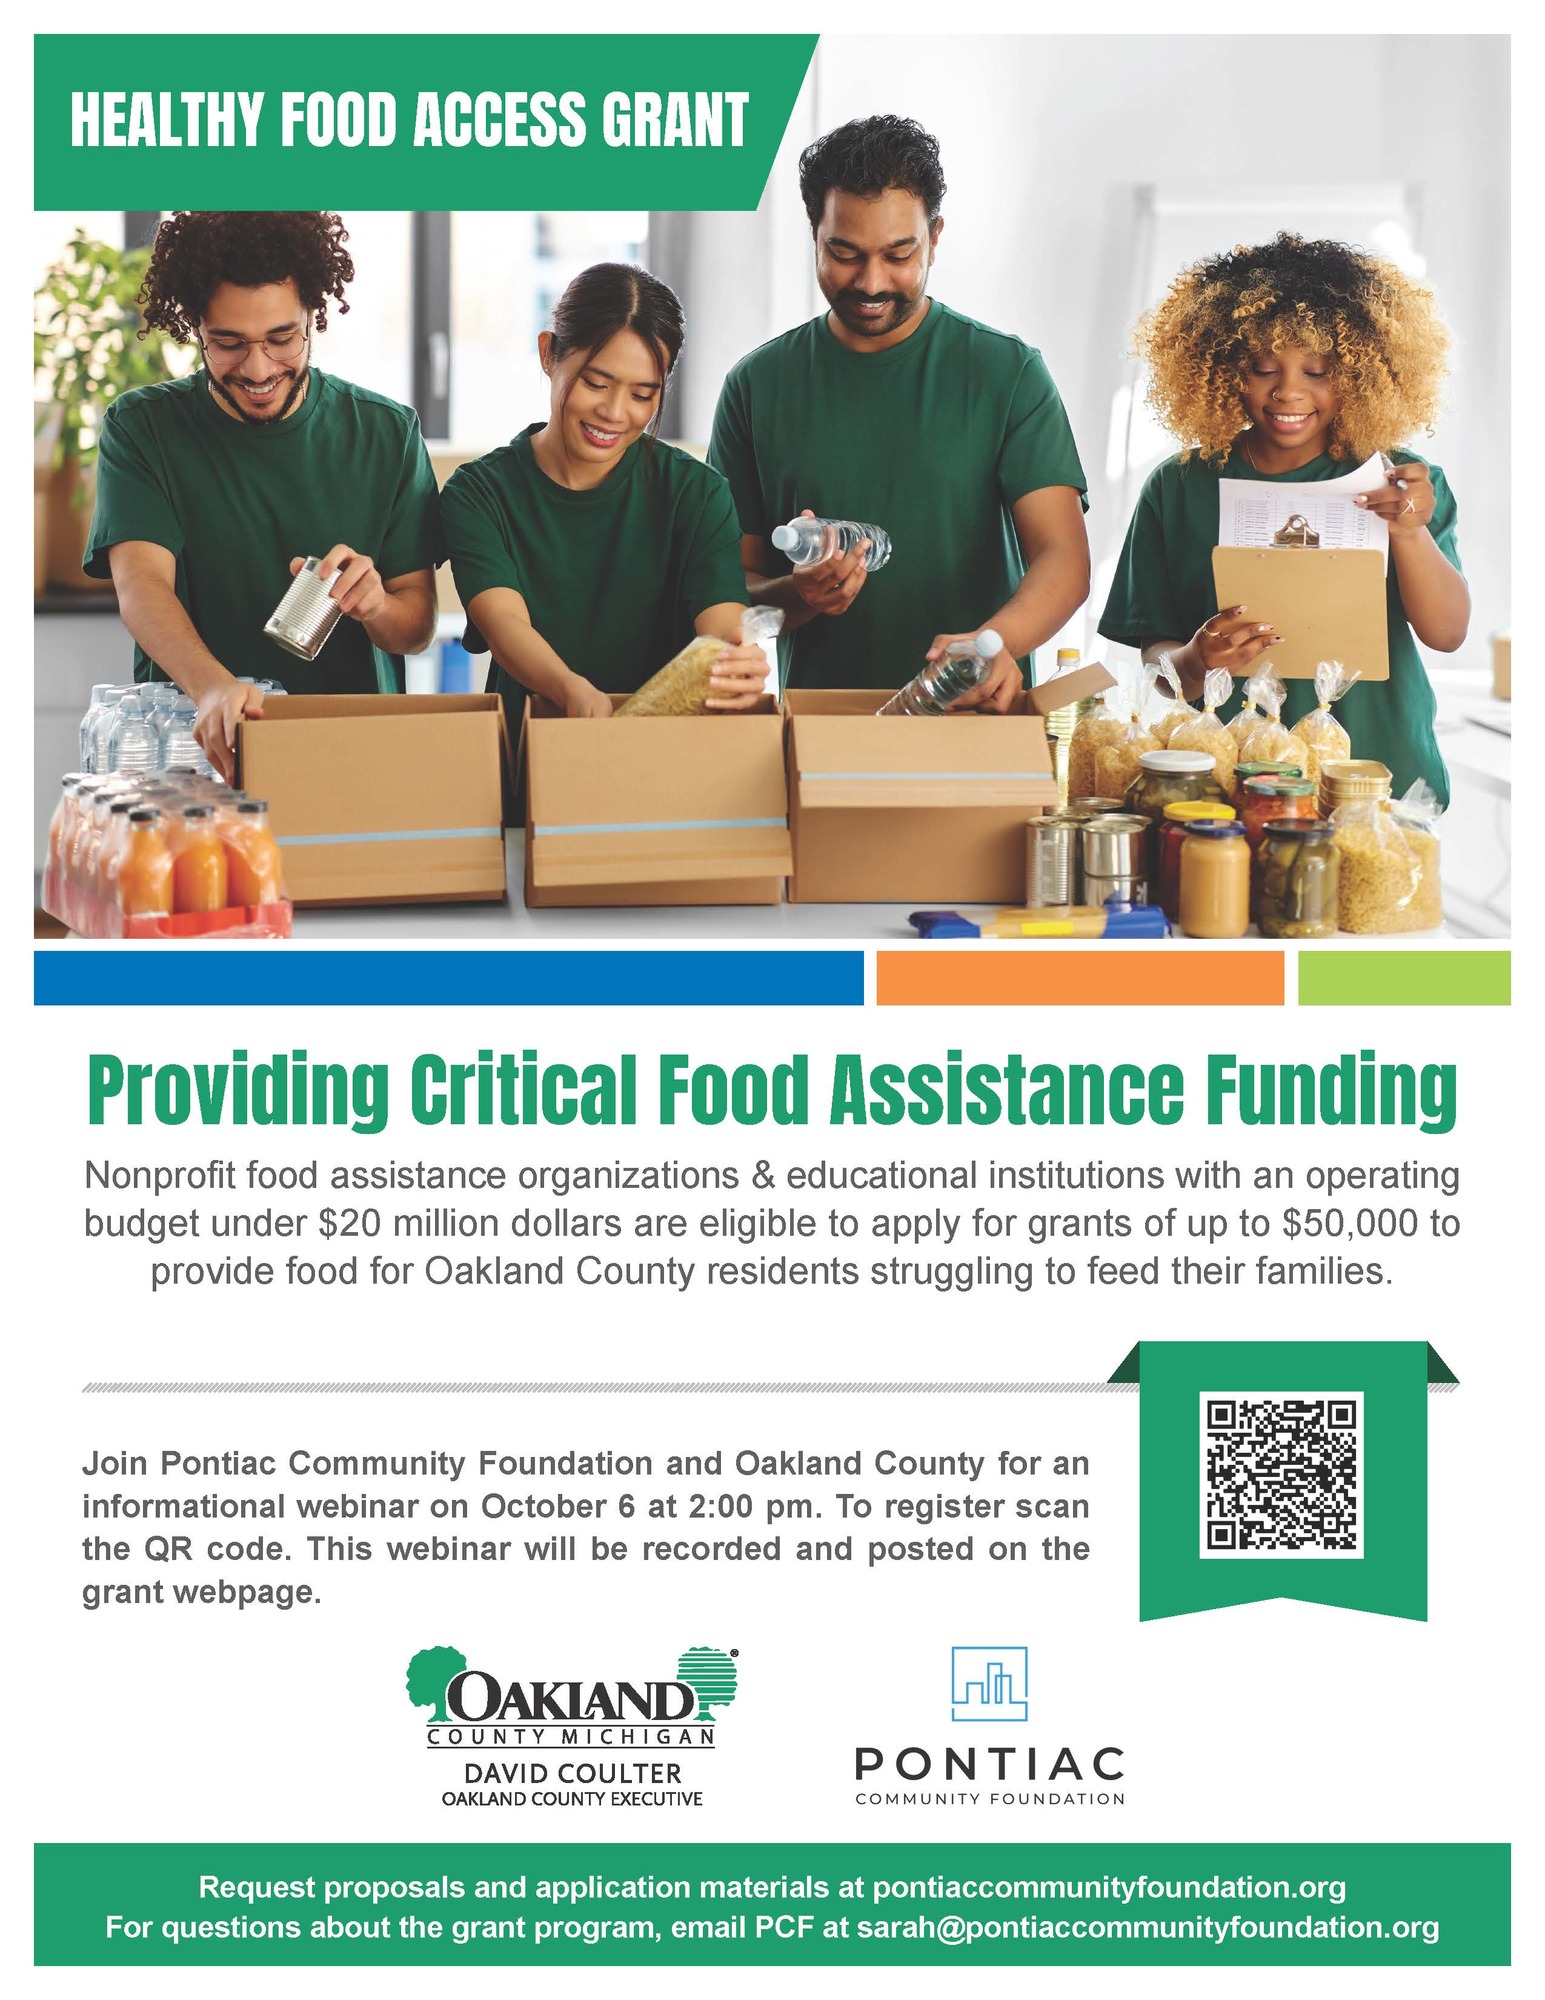 Now Accepting Grant Applications for the Healthy Food Access Grant Program!